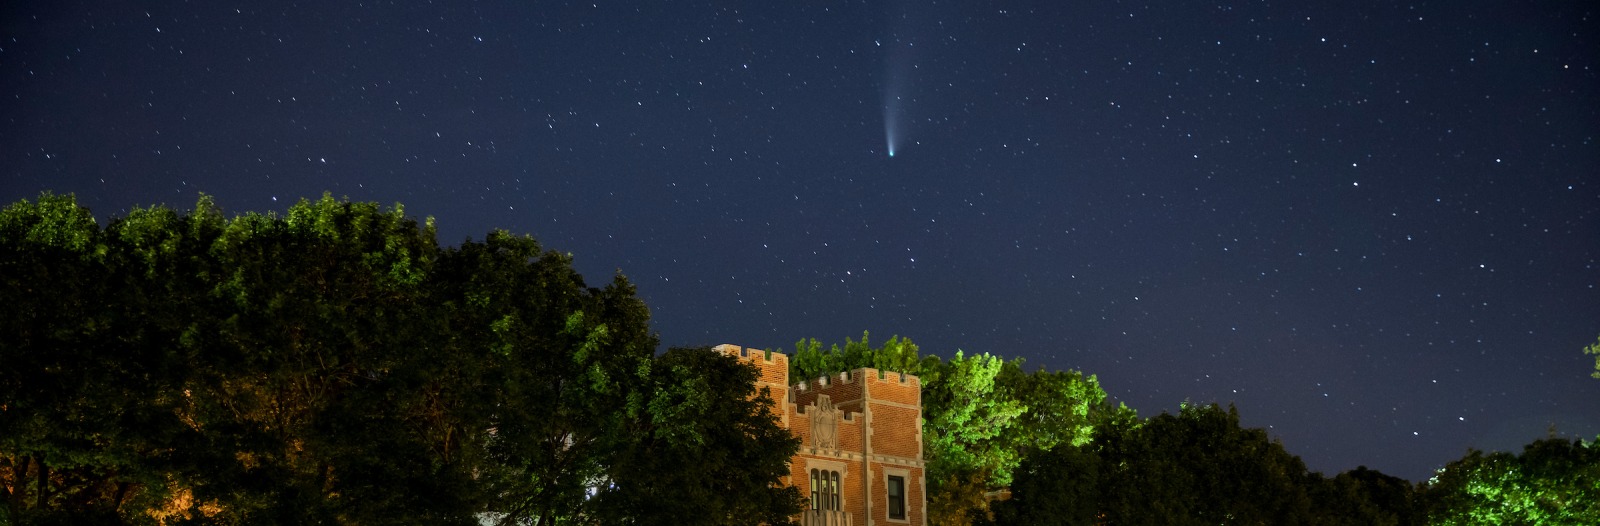 North campus with comet descending in the night sky